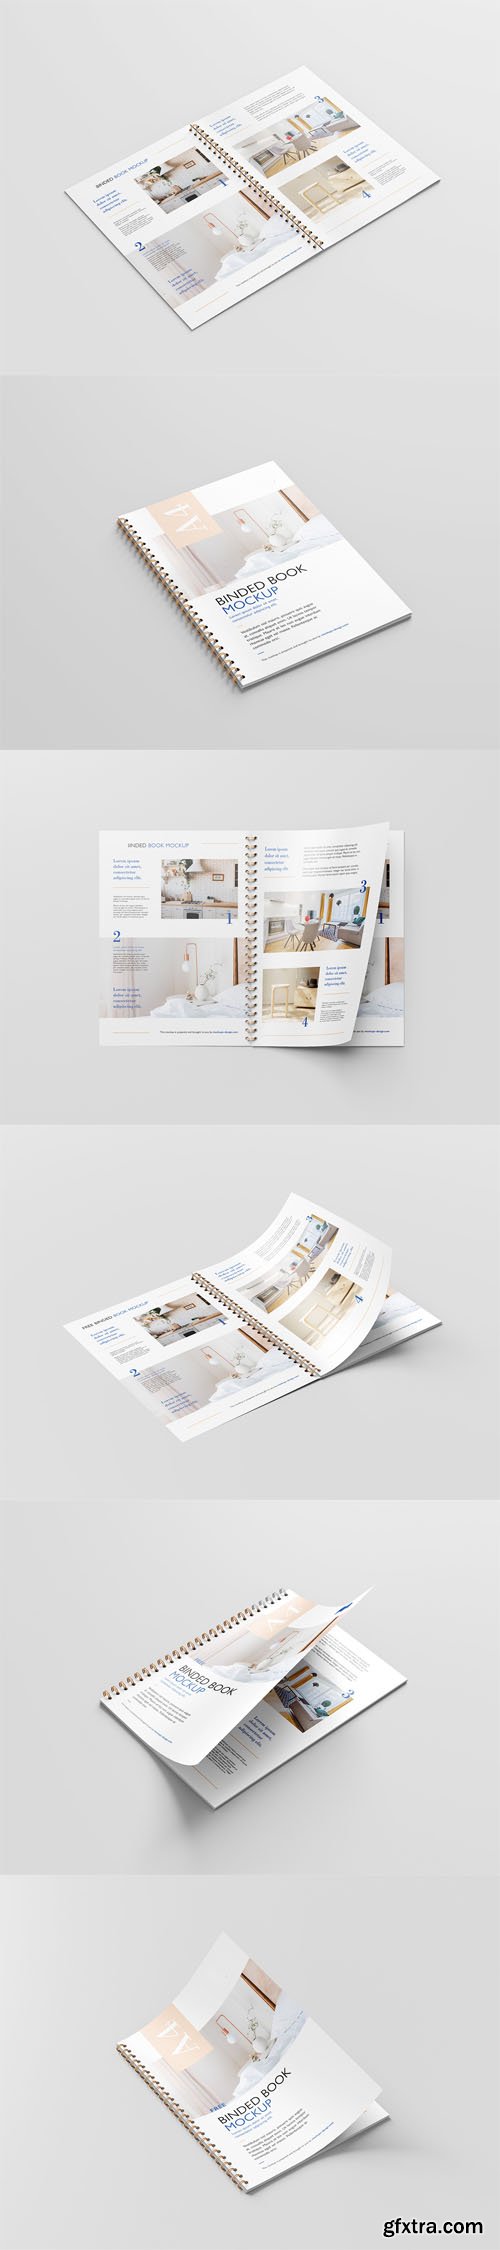 Binded Book PSD Mockup Template